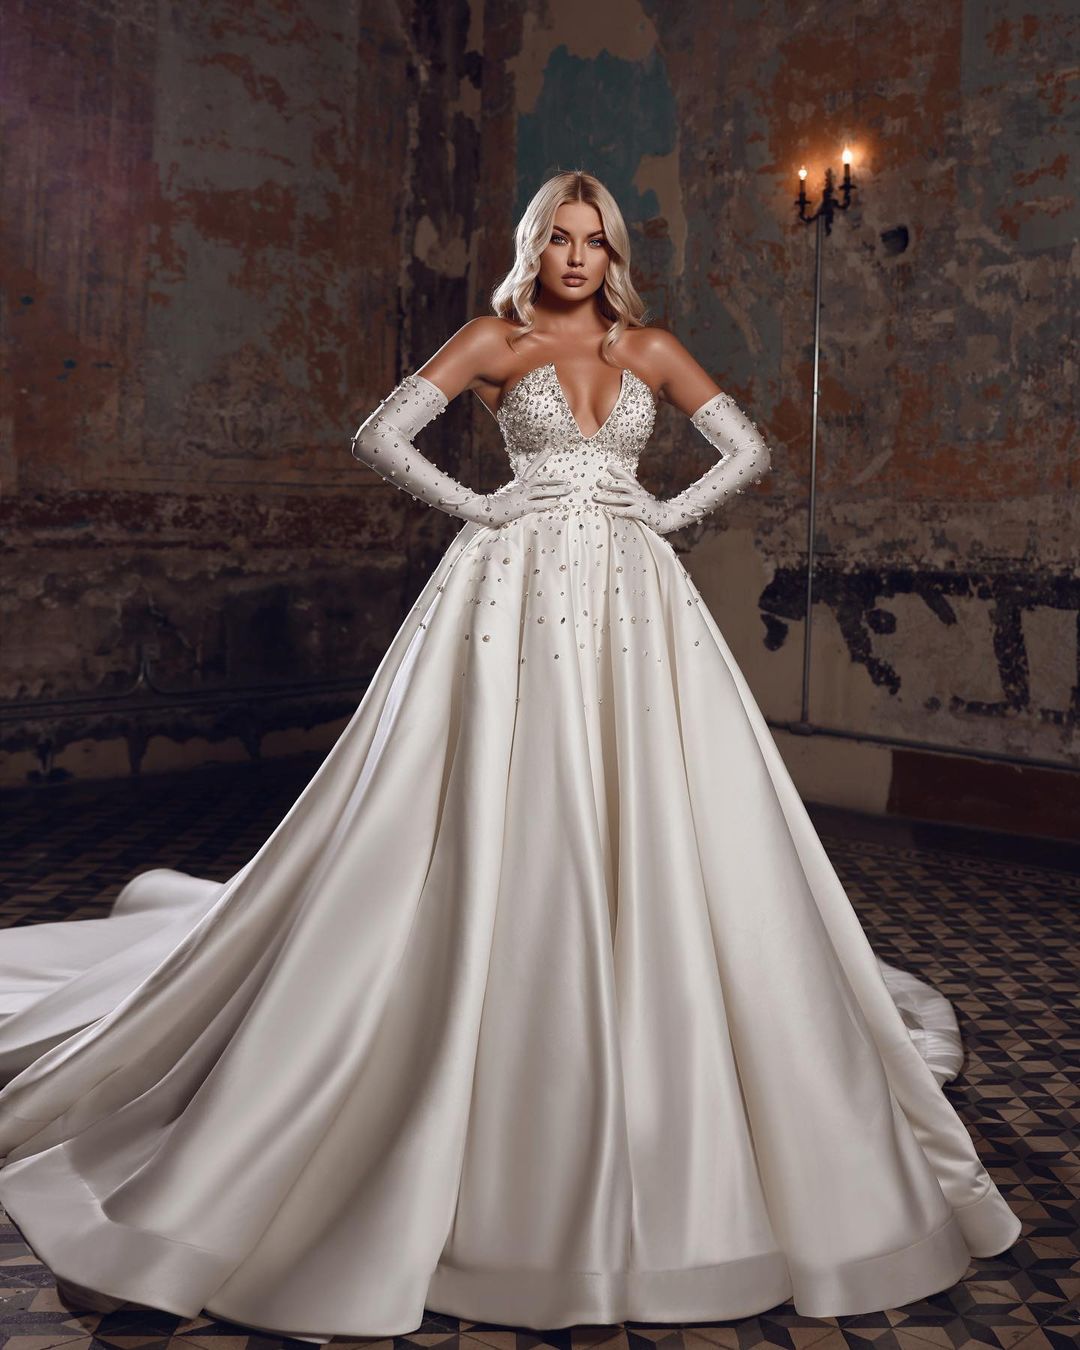 Wedding Dresses | Bridal Gowns | Knoxville